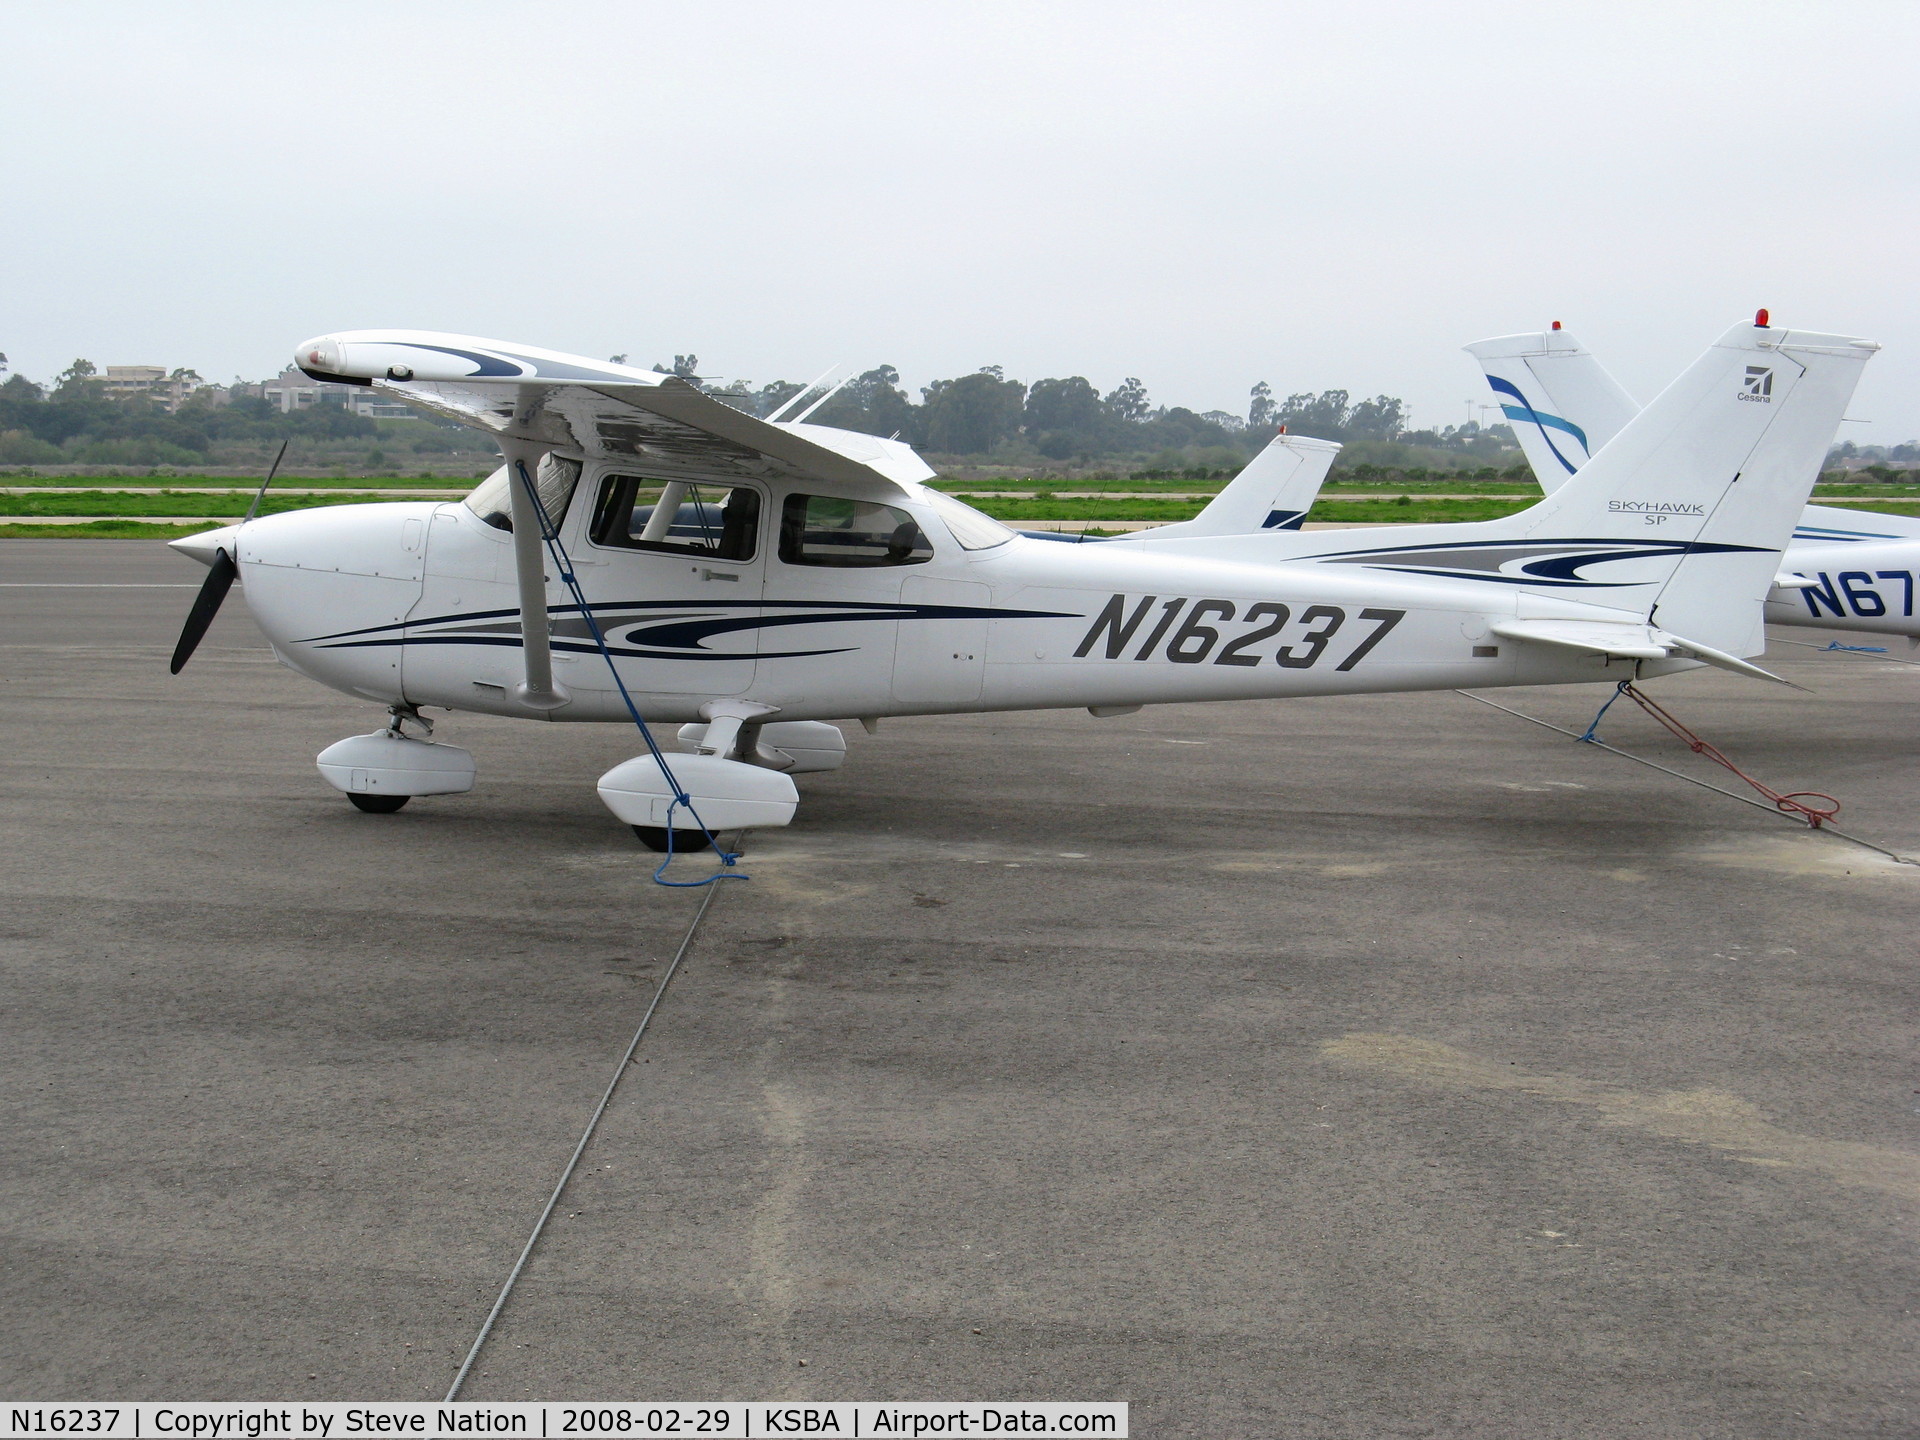 N16237, 2005 Cessna 172S C/N 172S9912, Locally-based 2005 Cessna 172S Skyhawk @ Santa Barbara Municipal Airport, CA (now registered to owner in East Setauket, NY)